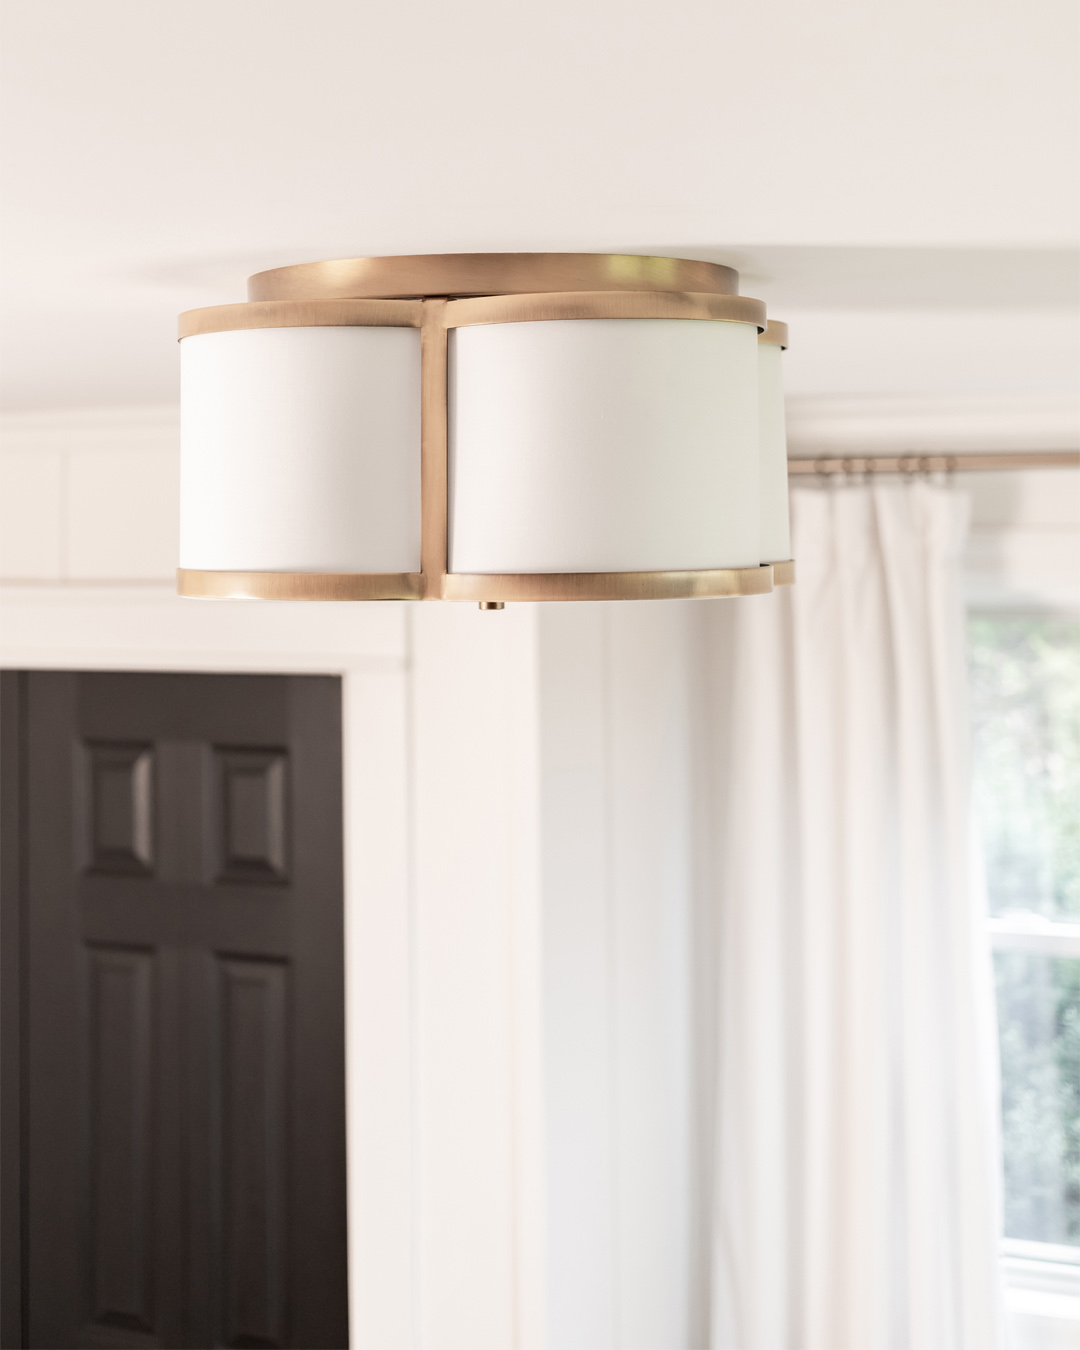 Today I'm sharing a little bit more about our new brass flushmount bedroom light fixture and why I'm so happy with it.